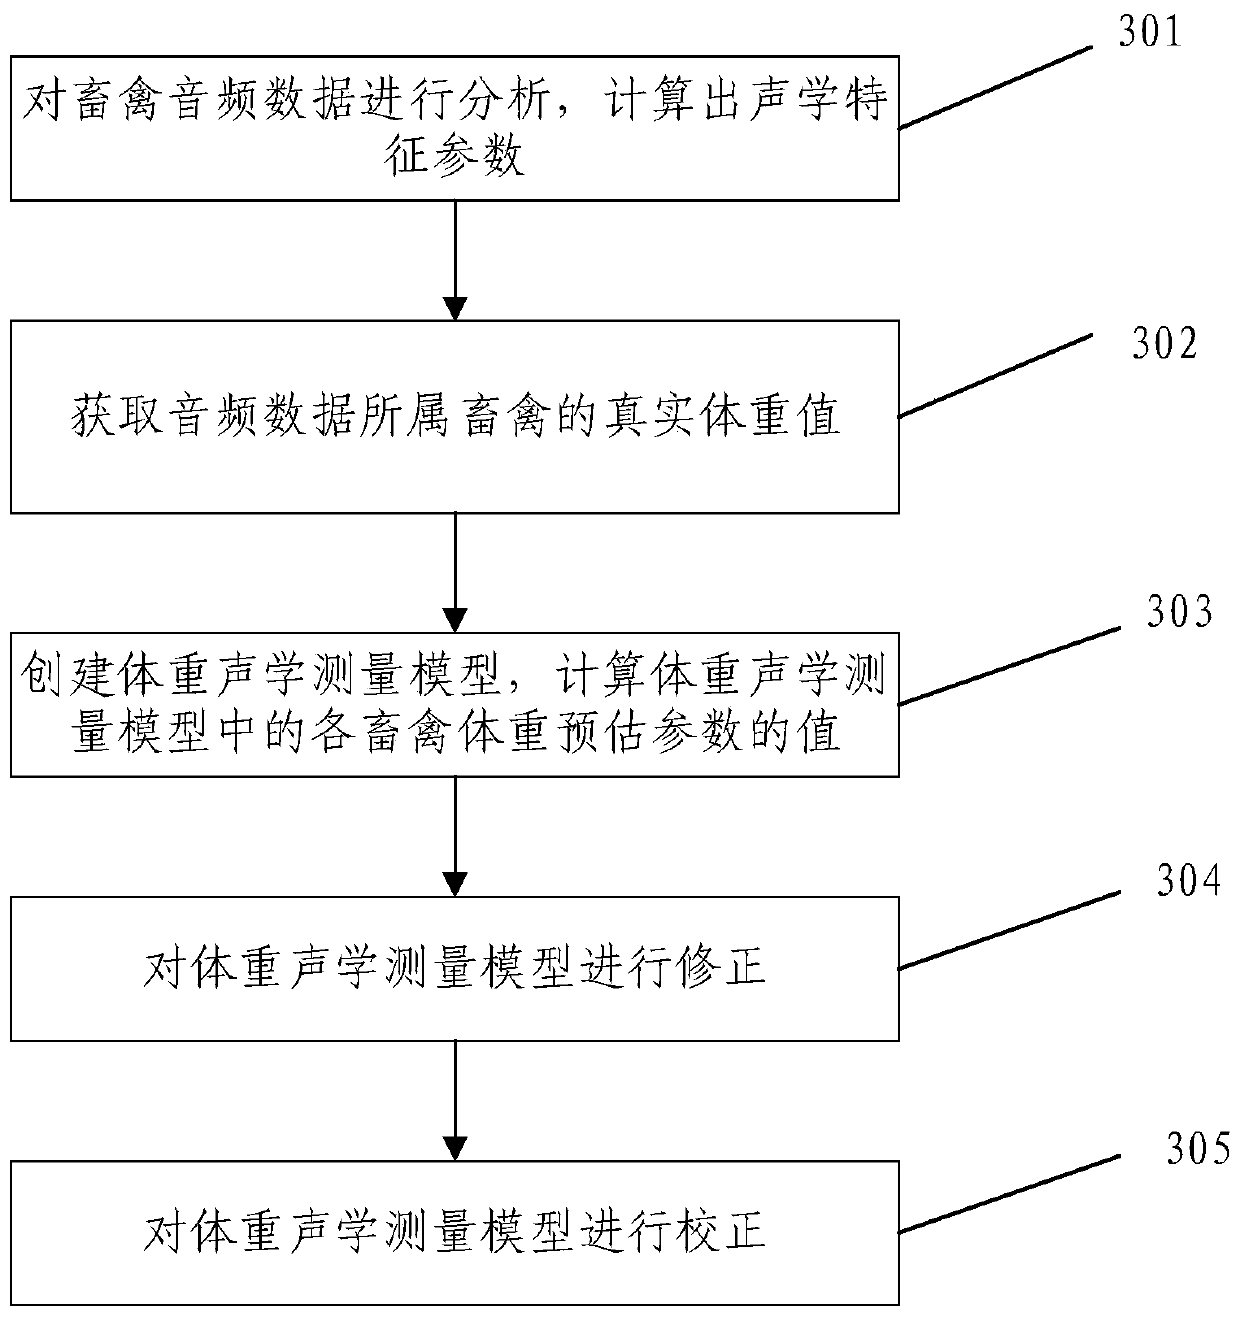 Creation method of body weight acoustic measurement model, body weight measuring method, creation device of body weight acoustic measurement model, and body weight acoustic measuring device